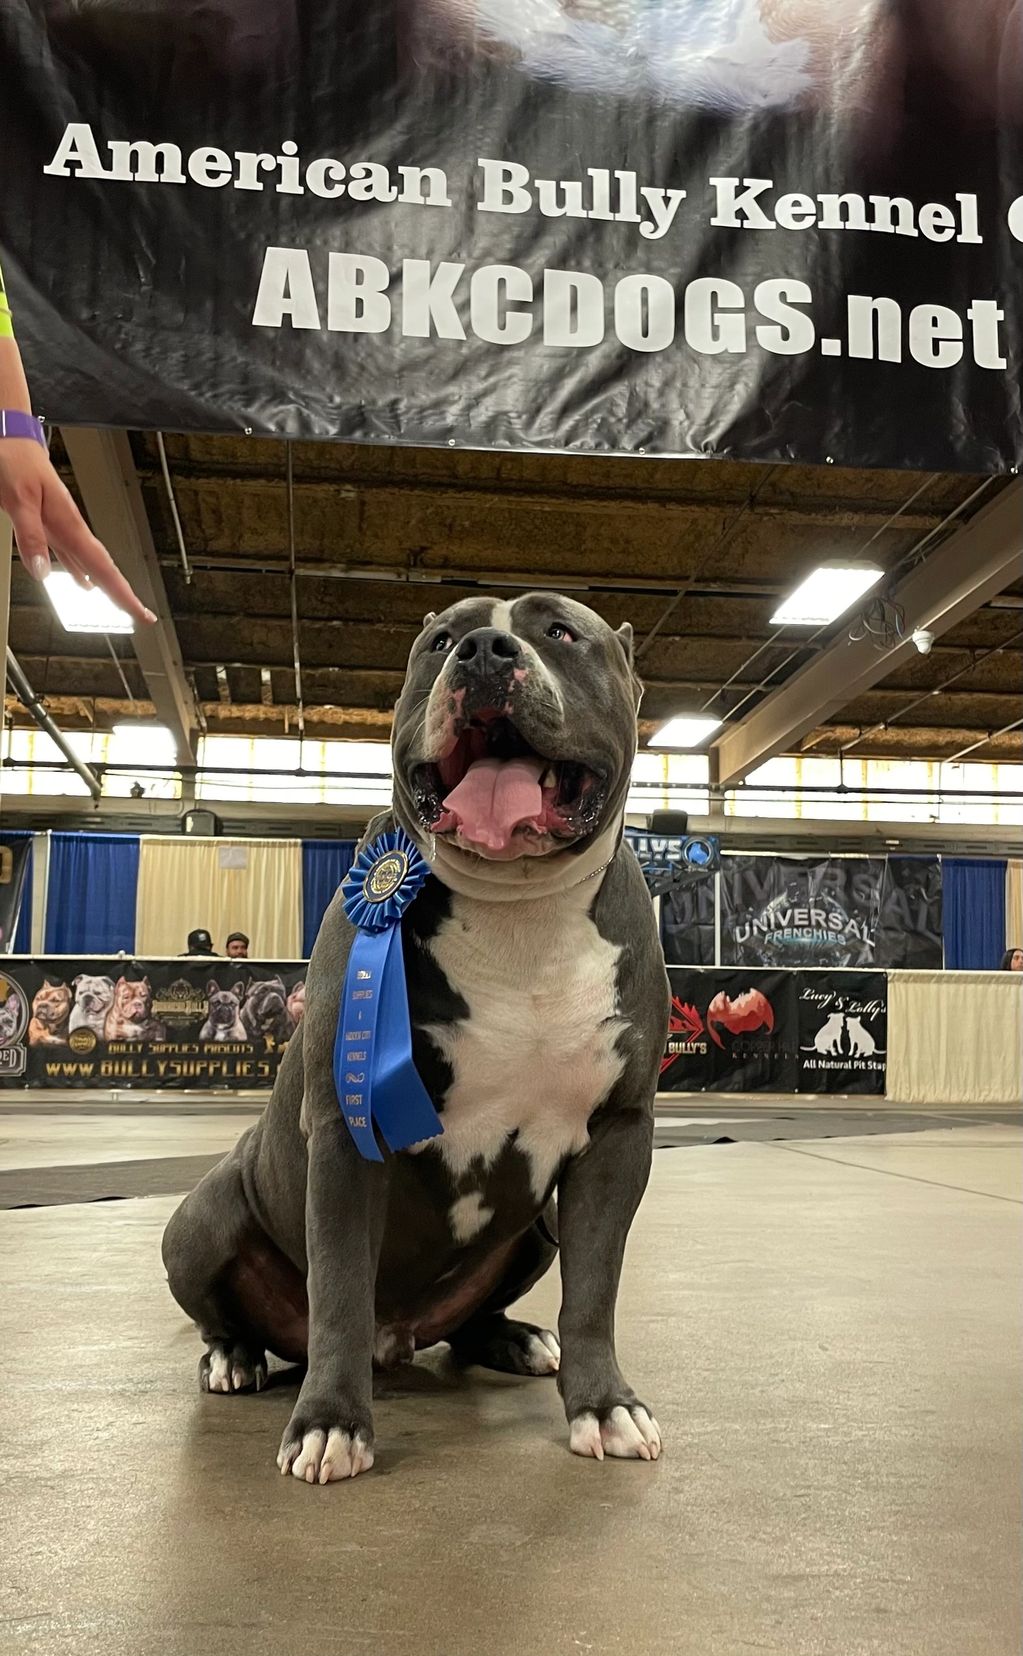 Drego one 1st place for XL American Bully at his 1st time competing at an ABKC event. 